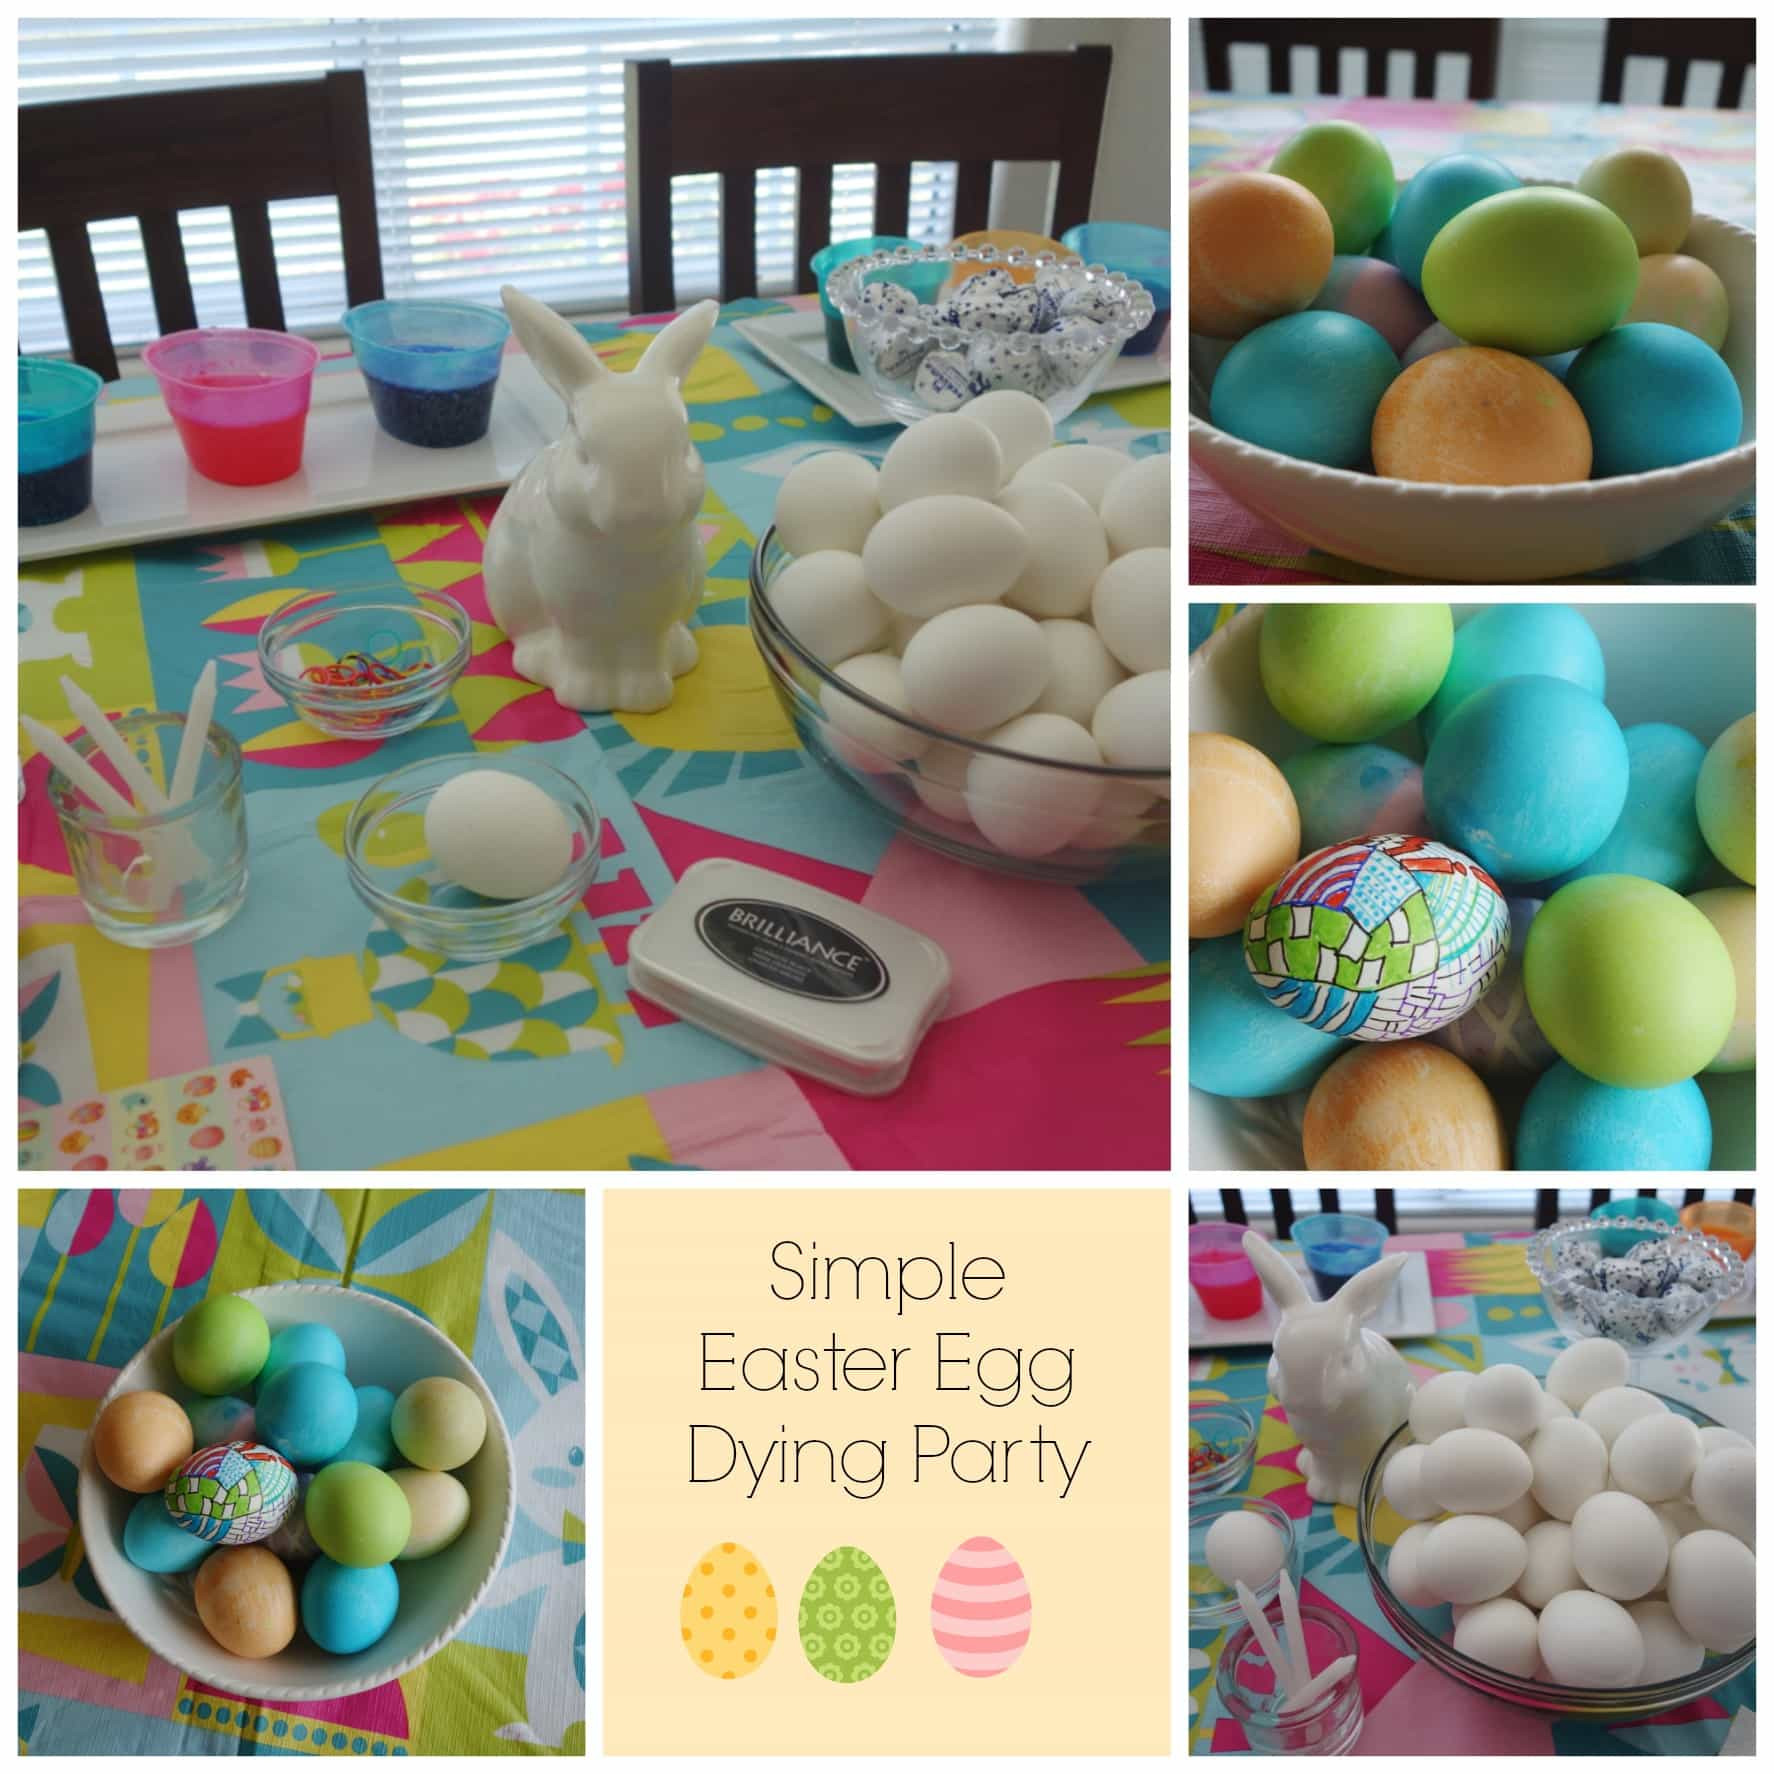 Easter Egg Dying Party Ideas
 Simple Easter Egg Dying Party Momma Can